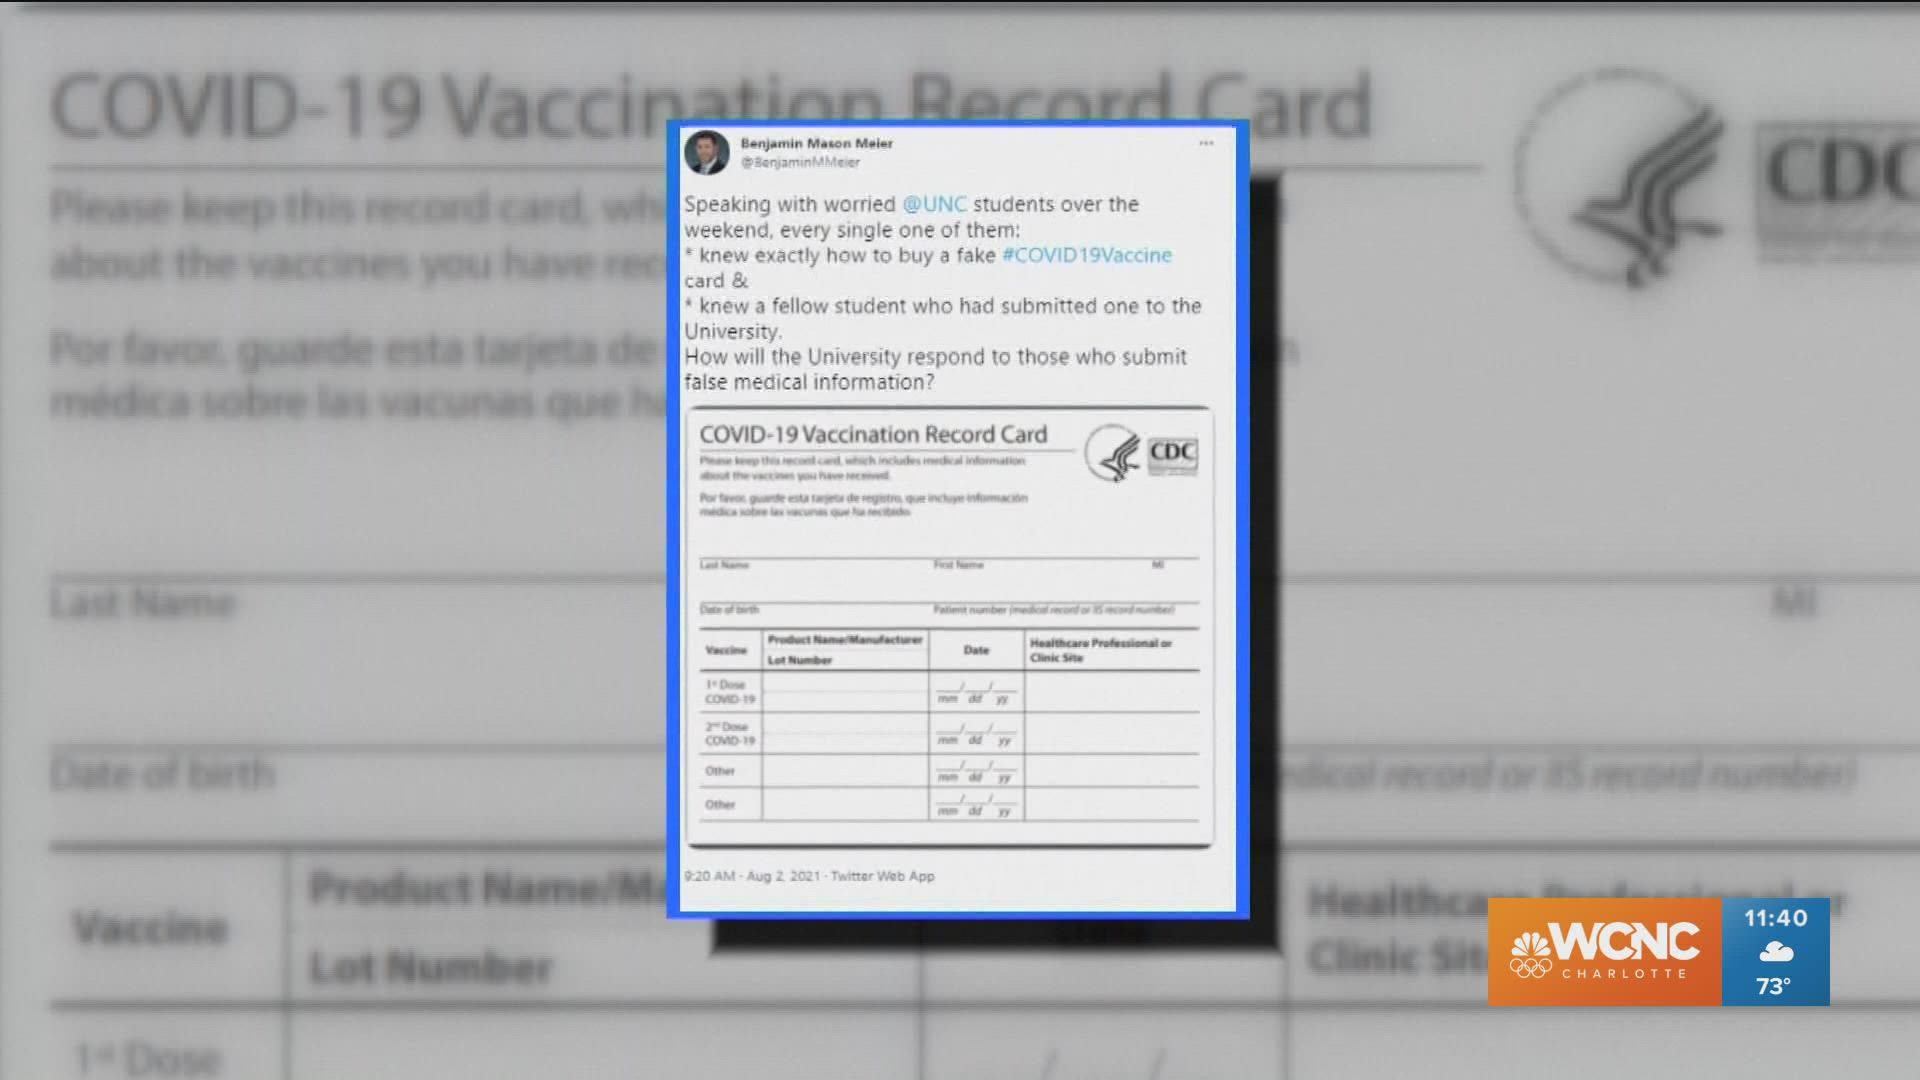 UNC Chapel Hill students are getting fake COVID-19 vaccine cards to avoid getting the shot. The vaccine is required for students.